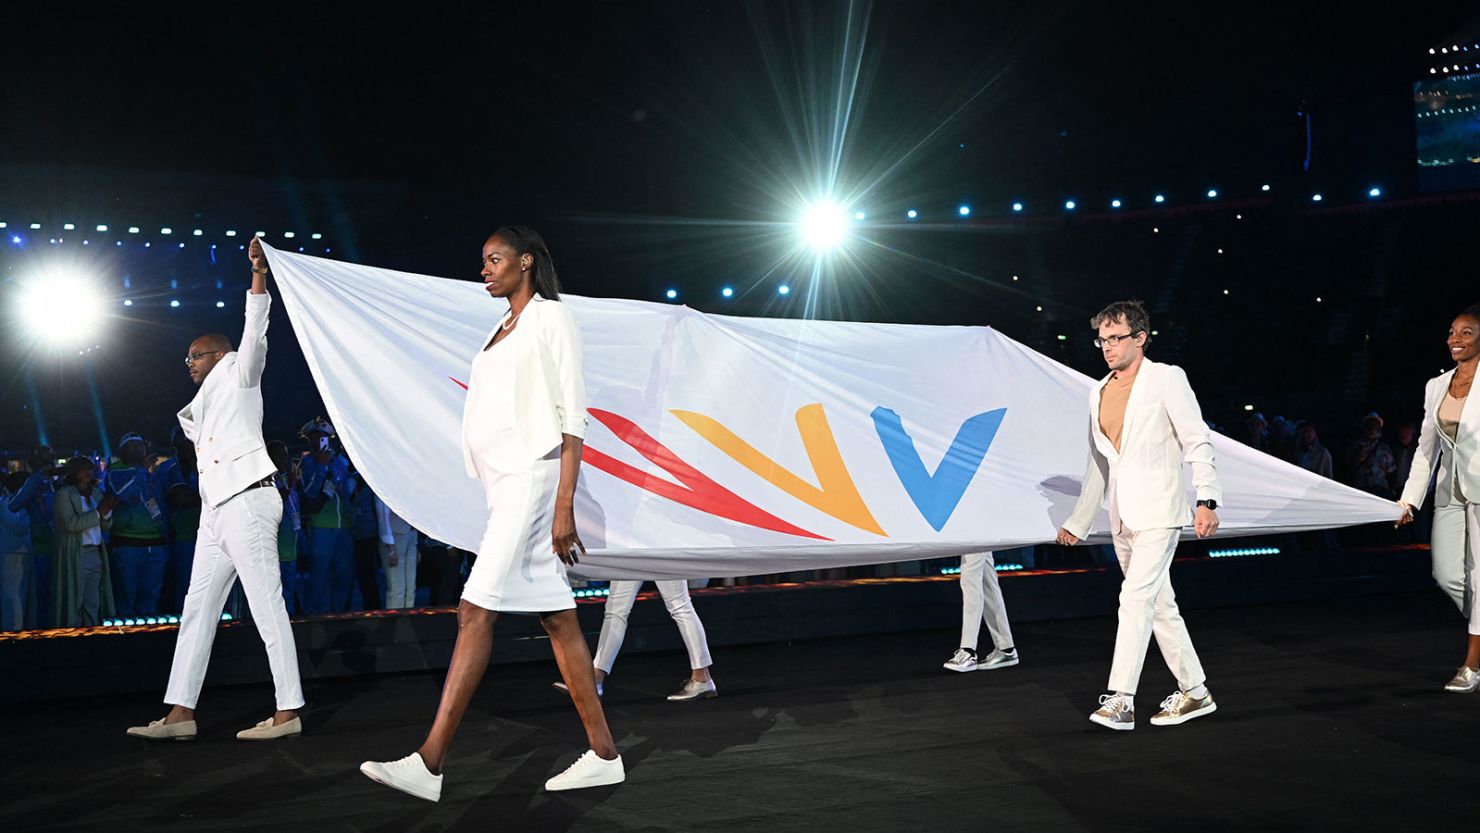 Athletes carry the Commonwealth Games Federation flag during the opening ceremony for the Commonwealth Games in Birmingham, central England, on July 28, 2022.